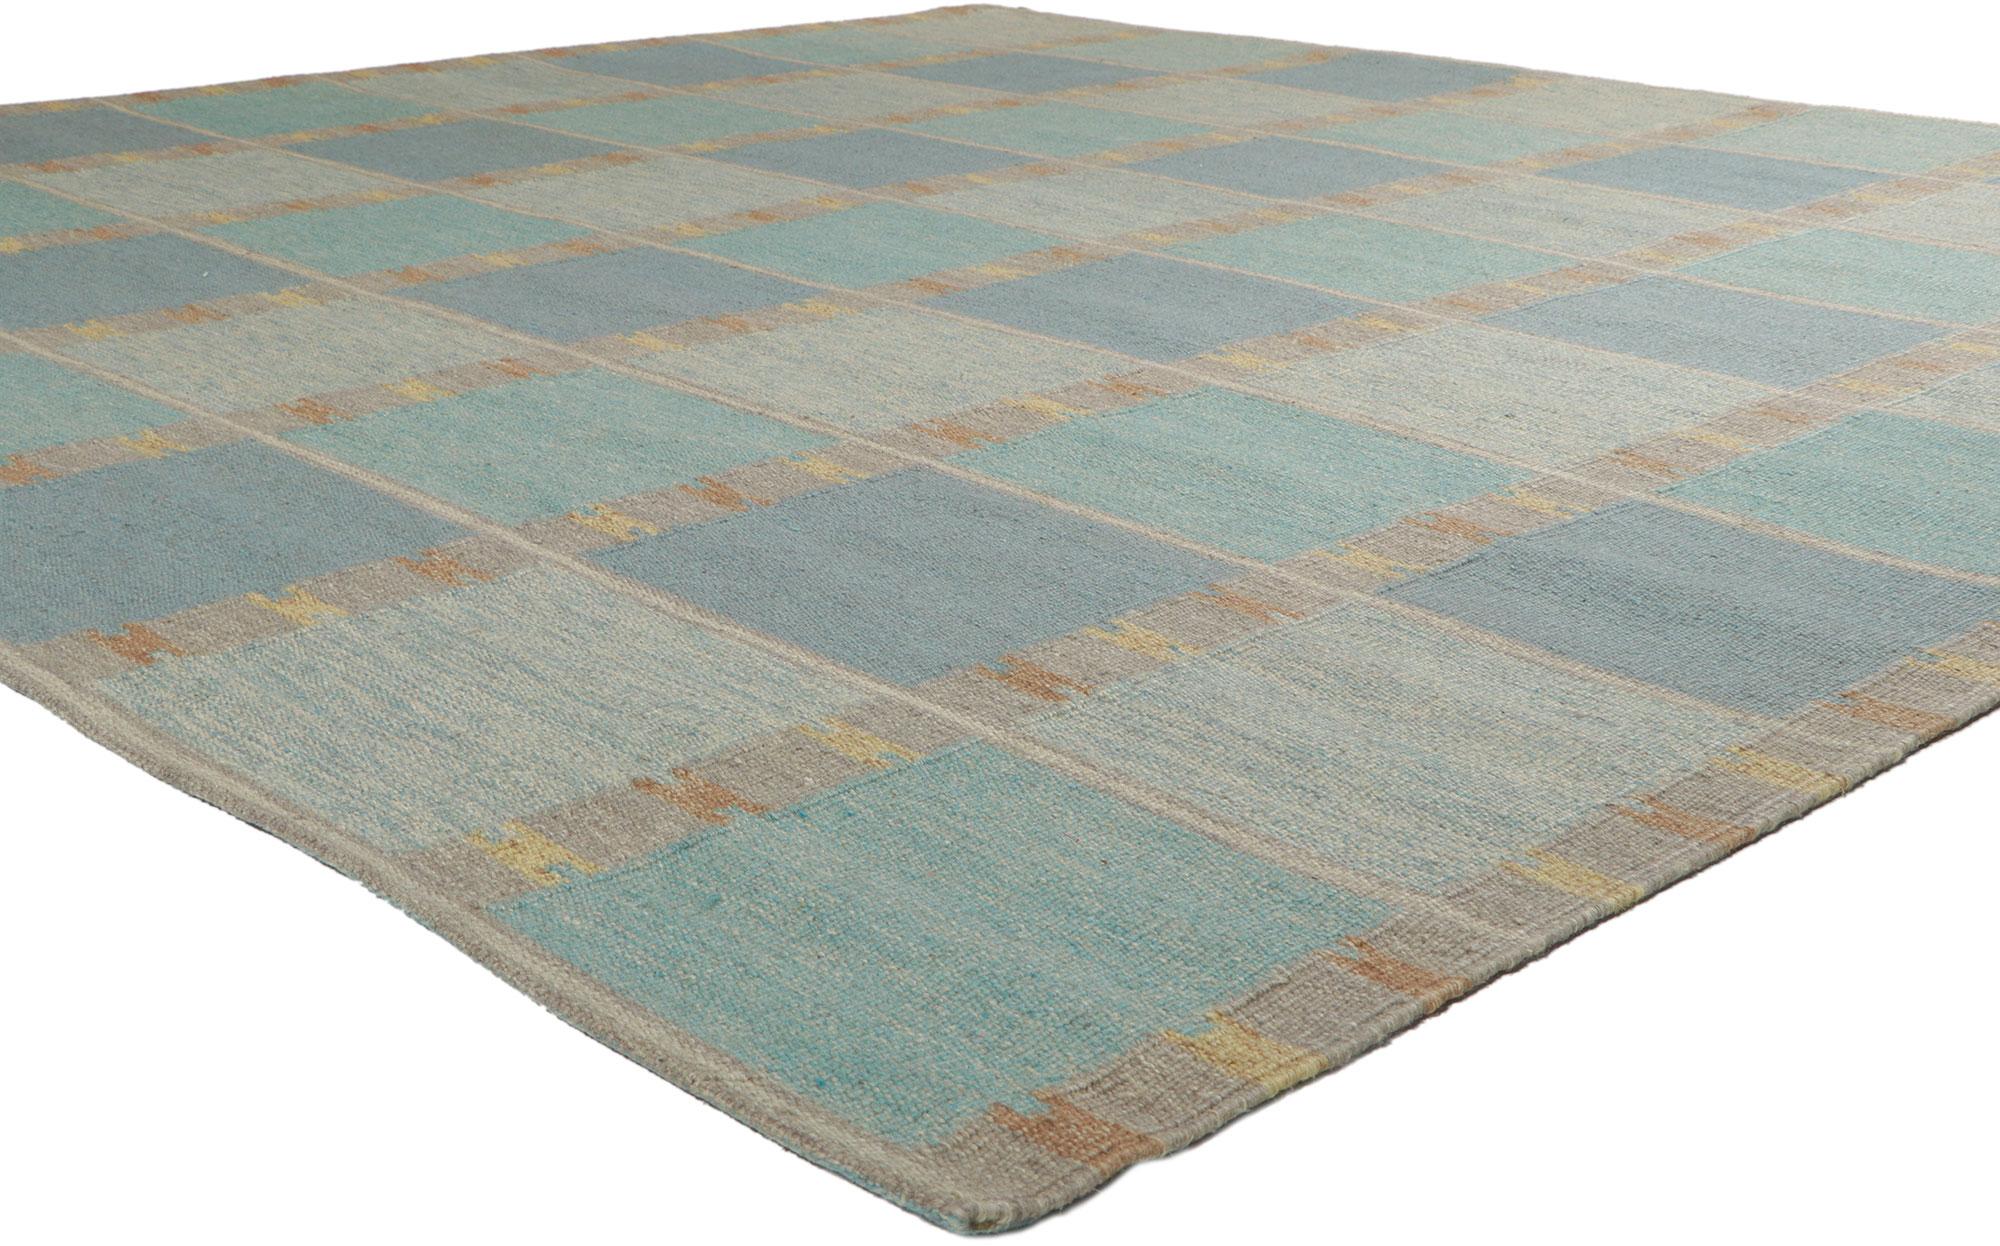 30849 New Swedish Inspired Kilim rug with Scandinavian Modern Style, 09'10 x 10'03. With its geometric design and bohemian hygge vibes, this hand-woven wool Swedish Indian Kilim rug beautifully embodies the simplicity of Scandinavian modern style.